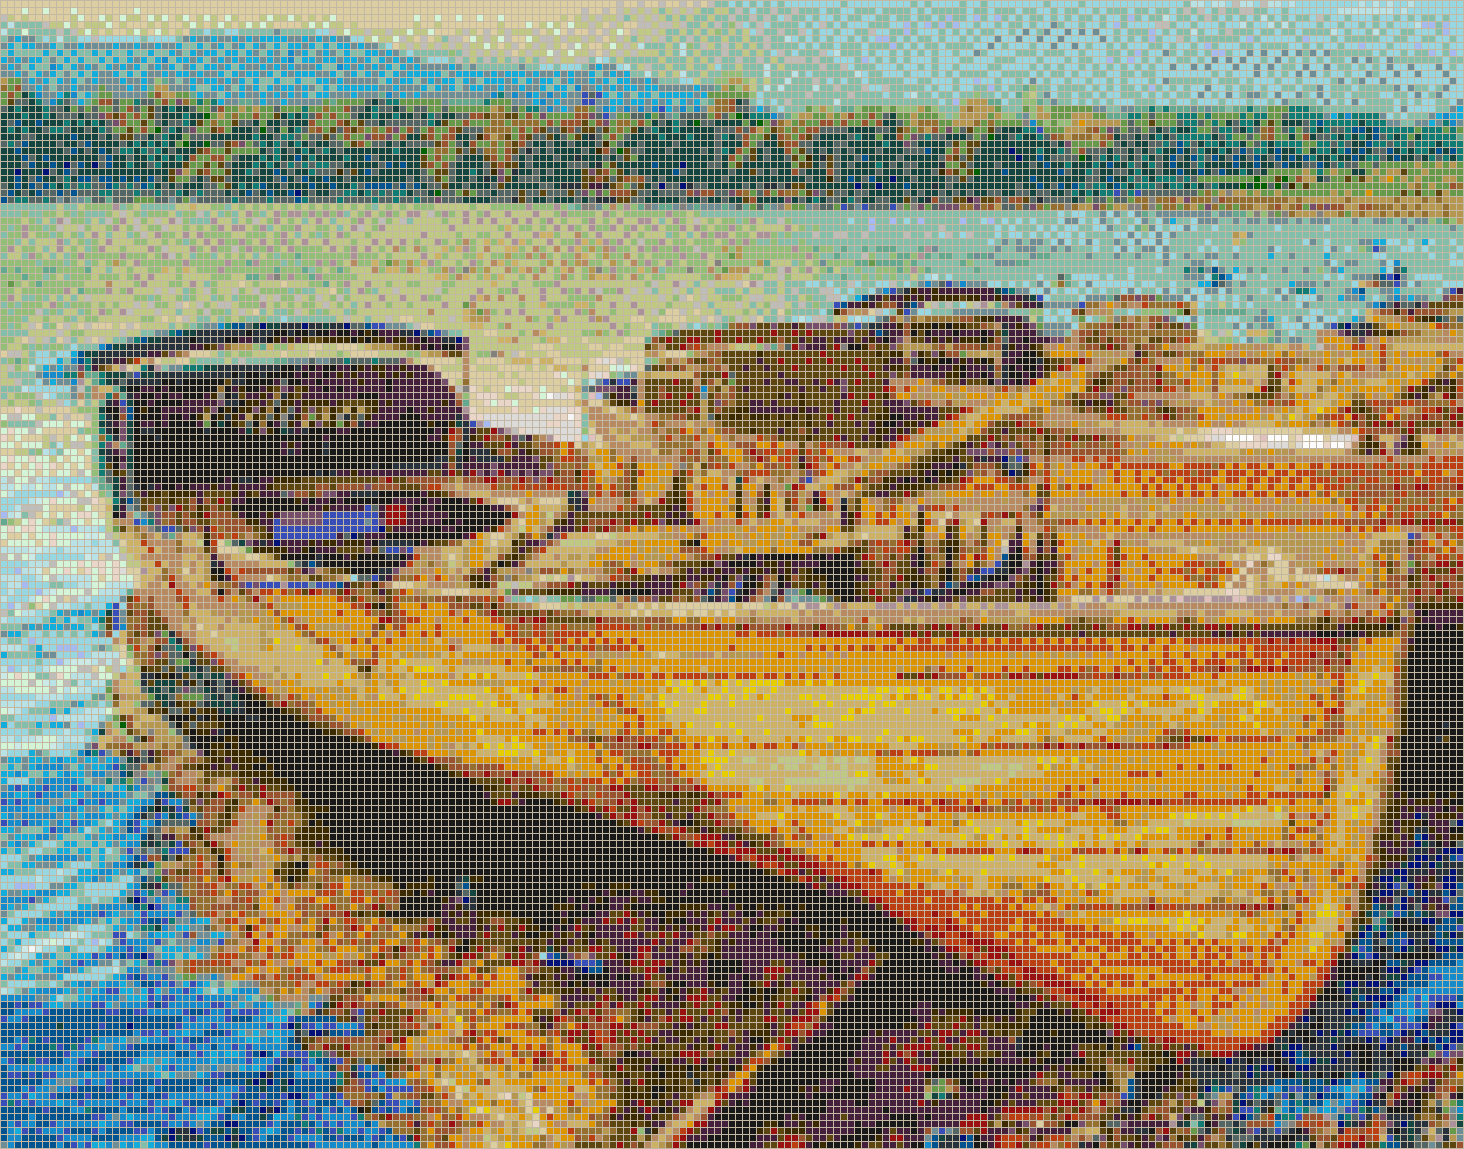 Derwentwater Boats (Lake District) - Mosaic Tile Picture Art